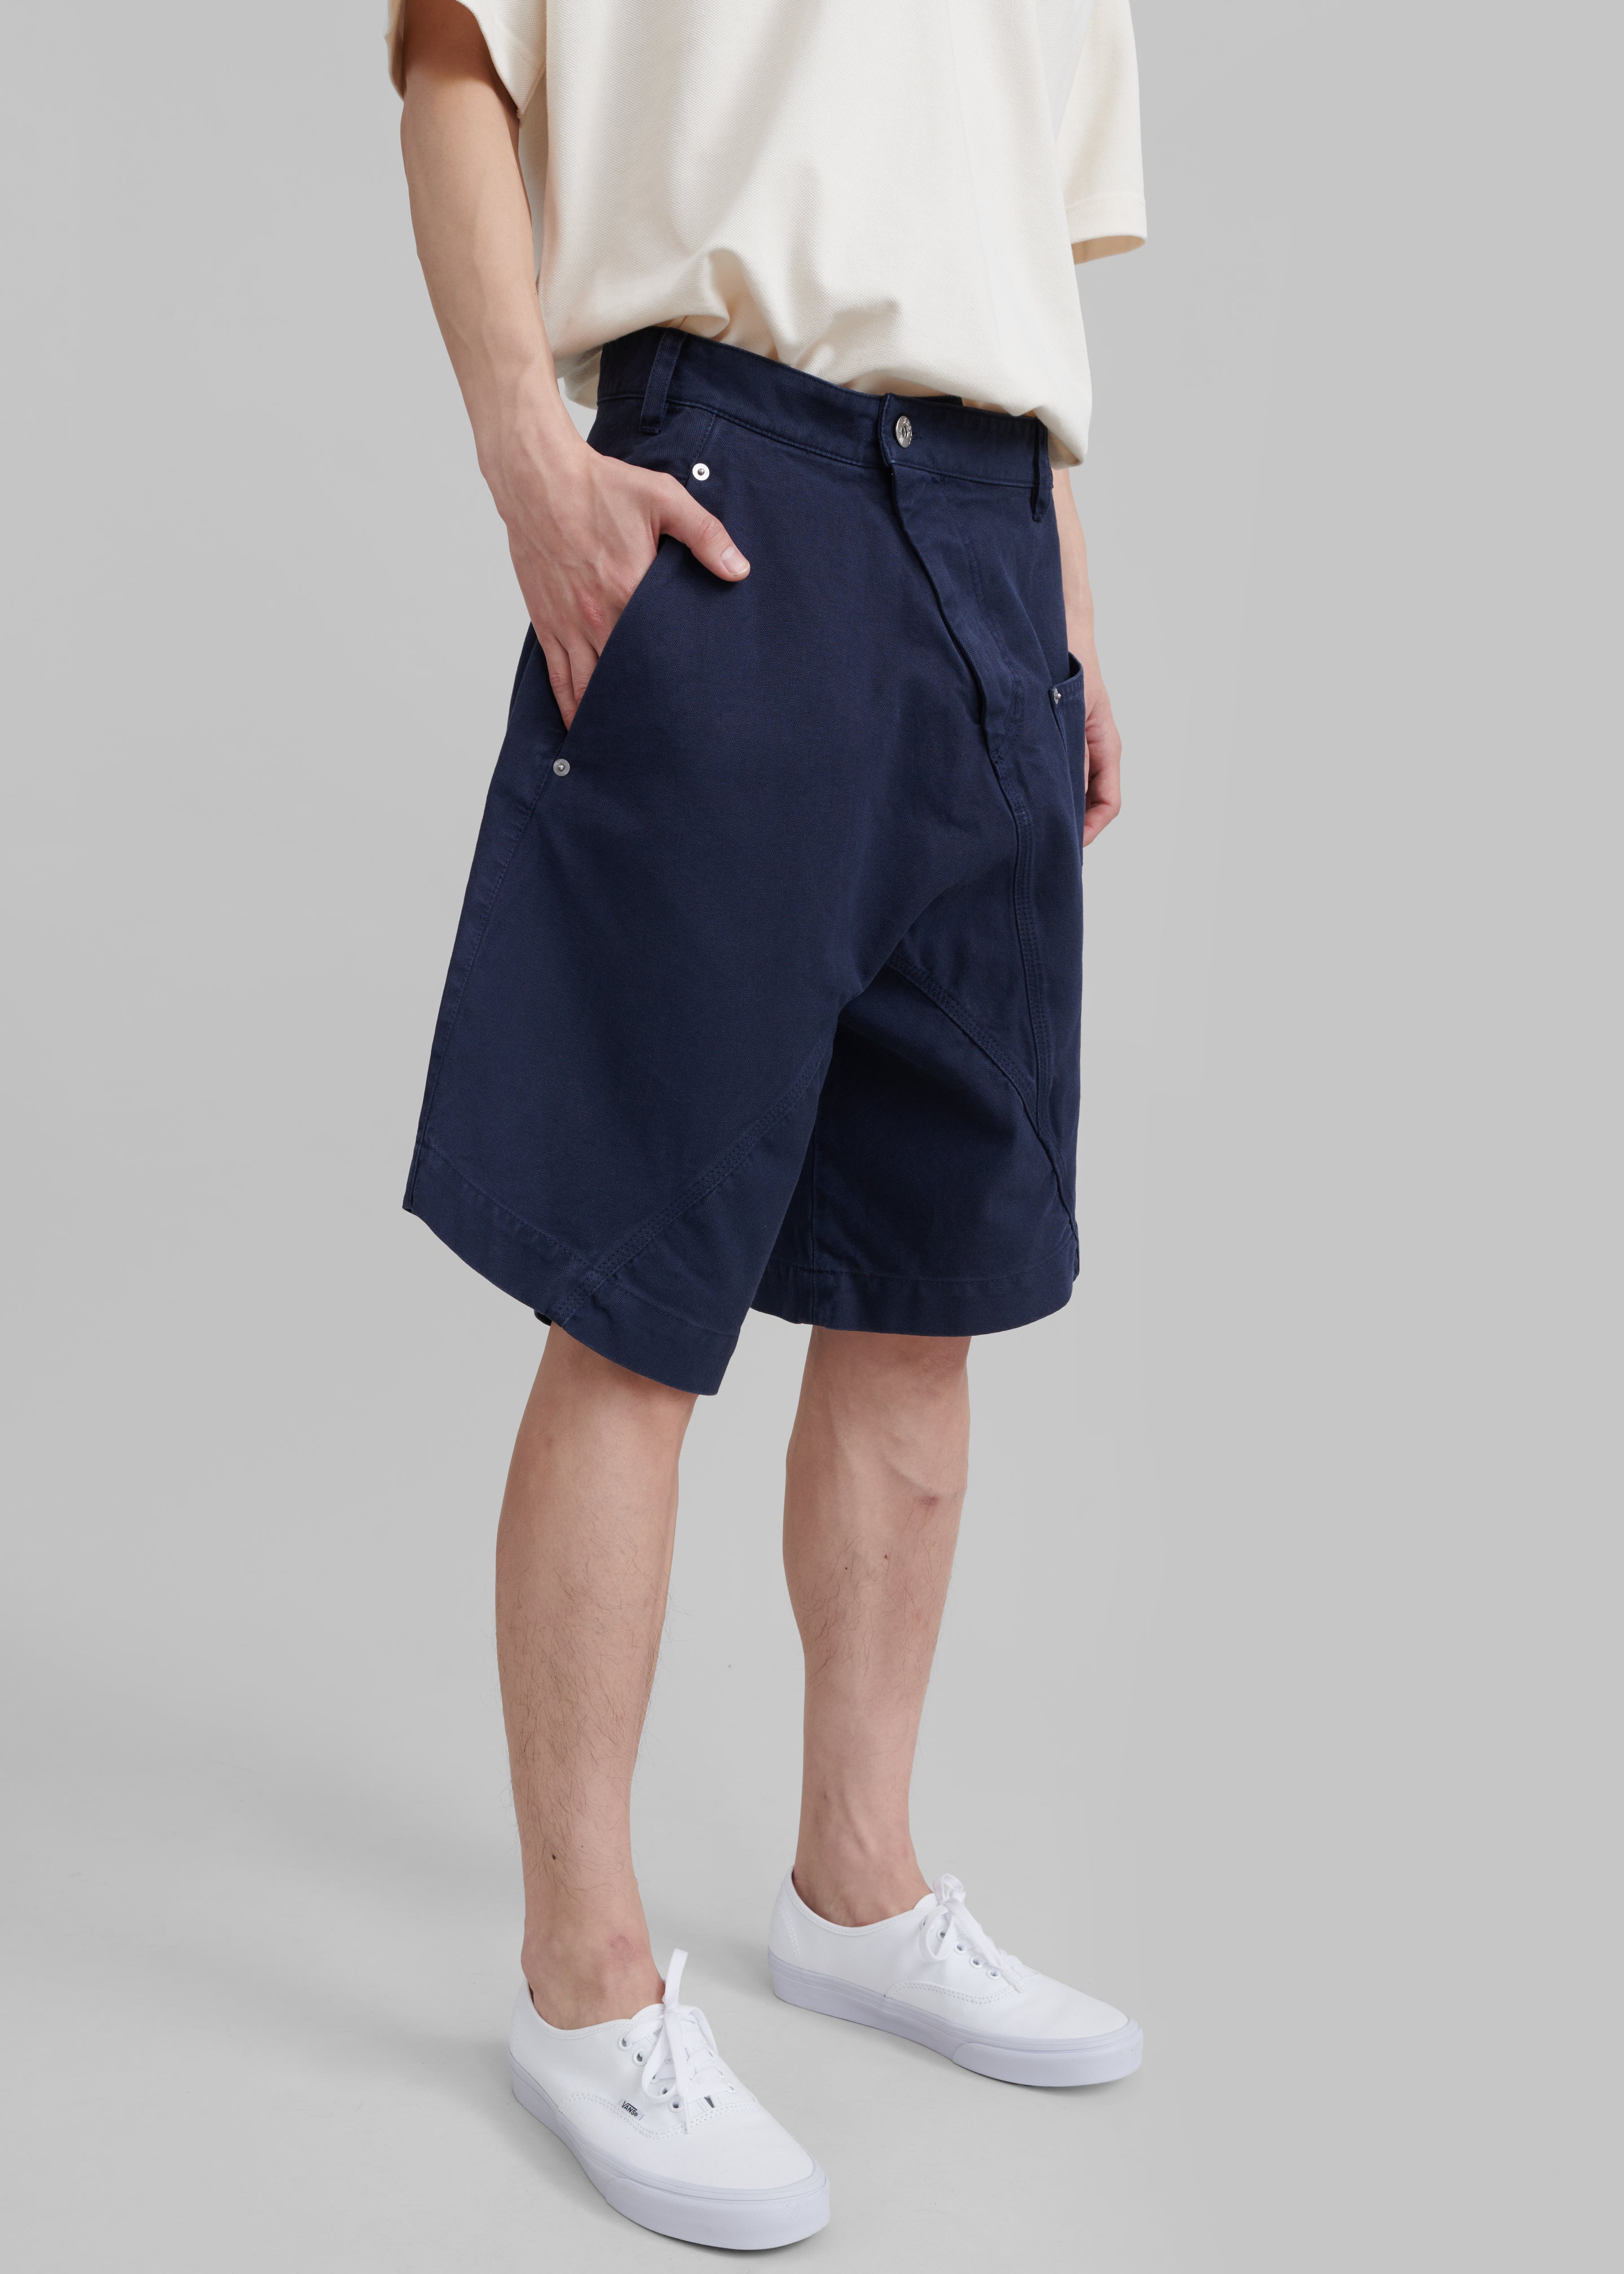 JW Anderson Twisted Shorts - Navy - 5